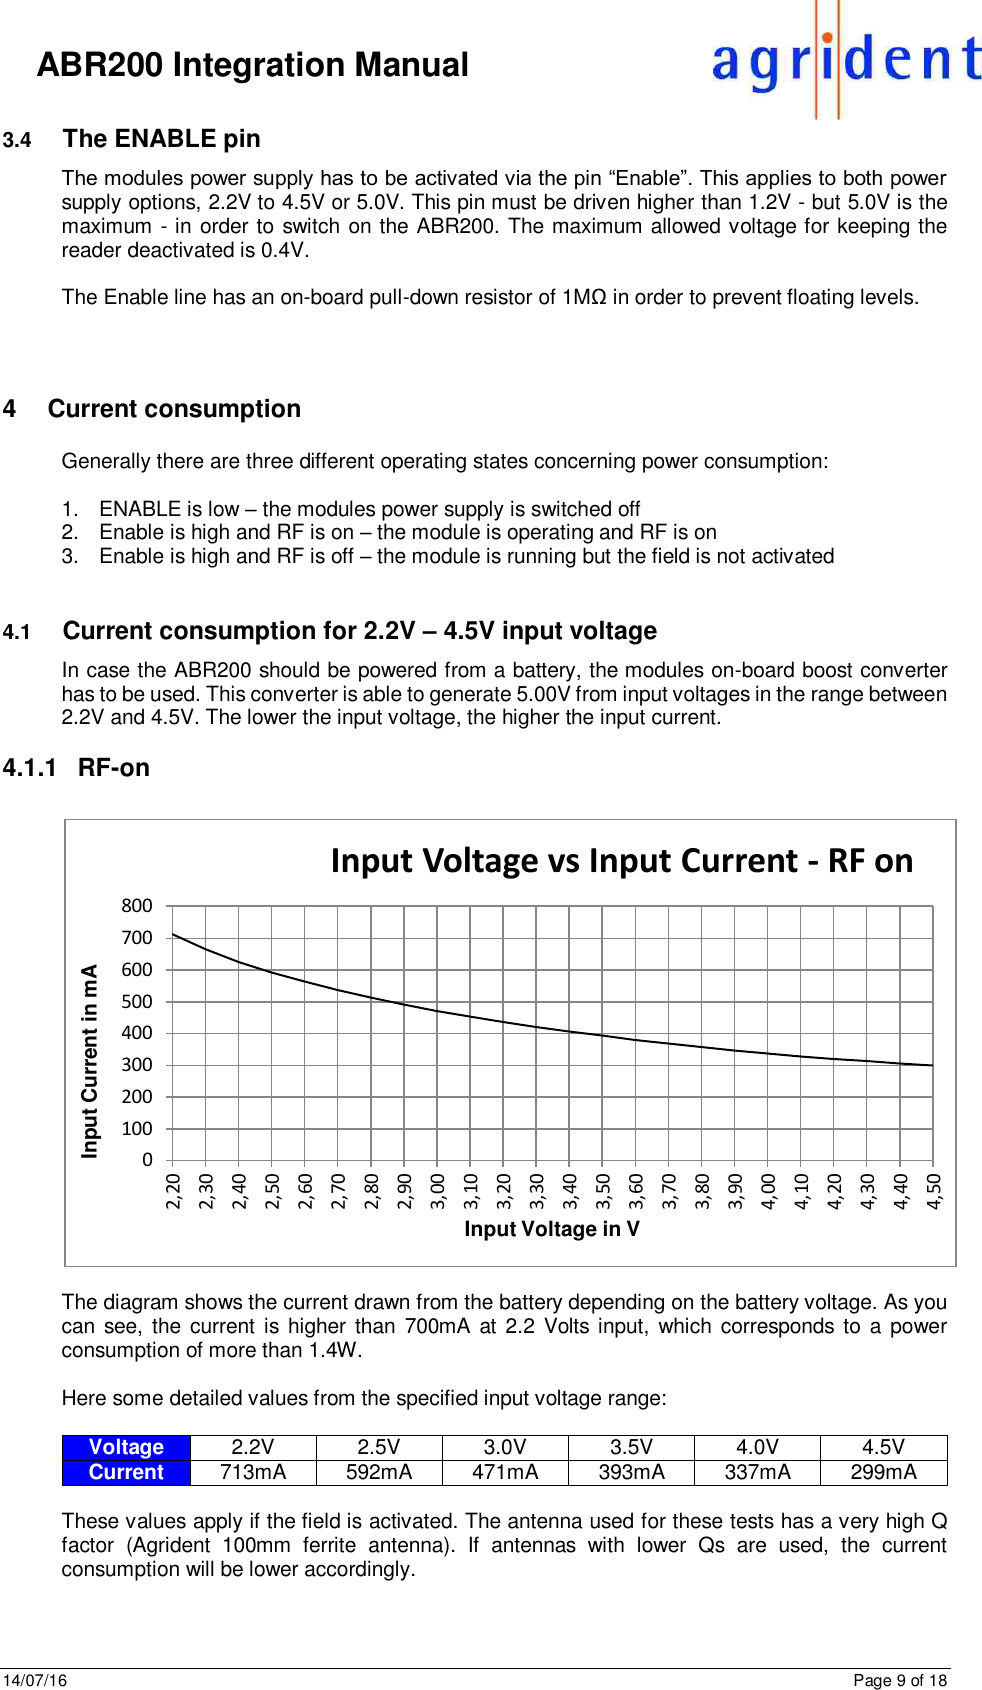 14/07/16      Page 9 of 18      ABR200 Integration Manual 3.4  The ENABLE pin The modules power supply has to be activated via the pin “Enable”. This applies to both power supply options, 2.2V to 4.5V or 5.0V. This pin must be driven higher than 1.2V - but 5.0V is the maximum - in order to switch on the ABR200. The maximum allowed voltage for keeping the reader deactivated is 0.4V.   The Enable line has an on-board pull-down resistor of 1MΩ in order to prevent floating levels.   4  Current consumption Generally there are three different operating states concerning power consumption:  1.  ENABLE is low – the modules power supply is switched off 2.  Enable is high and RF is on – the module is operating and RF is on 3.  Enable is high and RF is off – the module is running but the field is not activated   4.1  Current consumption for 2.2V – 4.5V input voltage In case the ABR200 should be powered from a battery, the modules on-board boost converter has to be used. This converter is able to generate 5.00V from input voltages in the range between 2.2V and 4.5V. The lower the input voltage, the higher the input current.  4.1.1  RF-on    The diagram shows the current drawn from the battery depending on the battery voltage. As you can see, the current is higher than  700mA  at 2.2 Volts  input, which  corresponds  to a power consumption of more than 1.4W.  Here some detailed values from the specified input voltage range:  Voltage 2.2V 2.5V 3.0V 3.5V 4.0V 4.5V Current 713mA 592mA 471mA 393mA 337mA 299mA  These values apply if the field is activated. The antenna used for these tests has a very high Q factor  (Agrident  100mm  ferrite  antenna).  If  antennas  with  lower  Qs  are  used,  the  current consumption will be lower accordingly.   01002003004005006007008002,202,302,402,502,602,702,802,903,003,103,203,303,403,503,603,703,803,904,004,104,204,304,404,50Input Current in mAInput Voltage in VInput Voltage vs Input Current - RF on